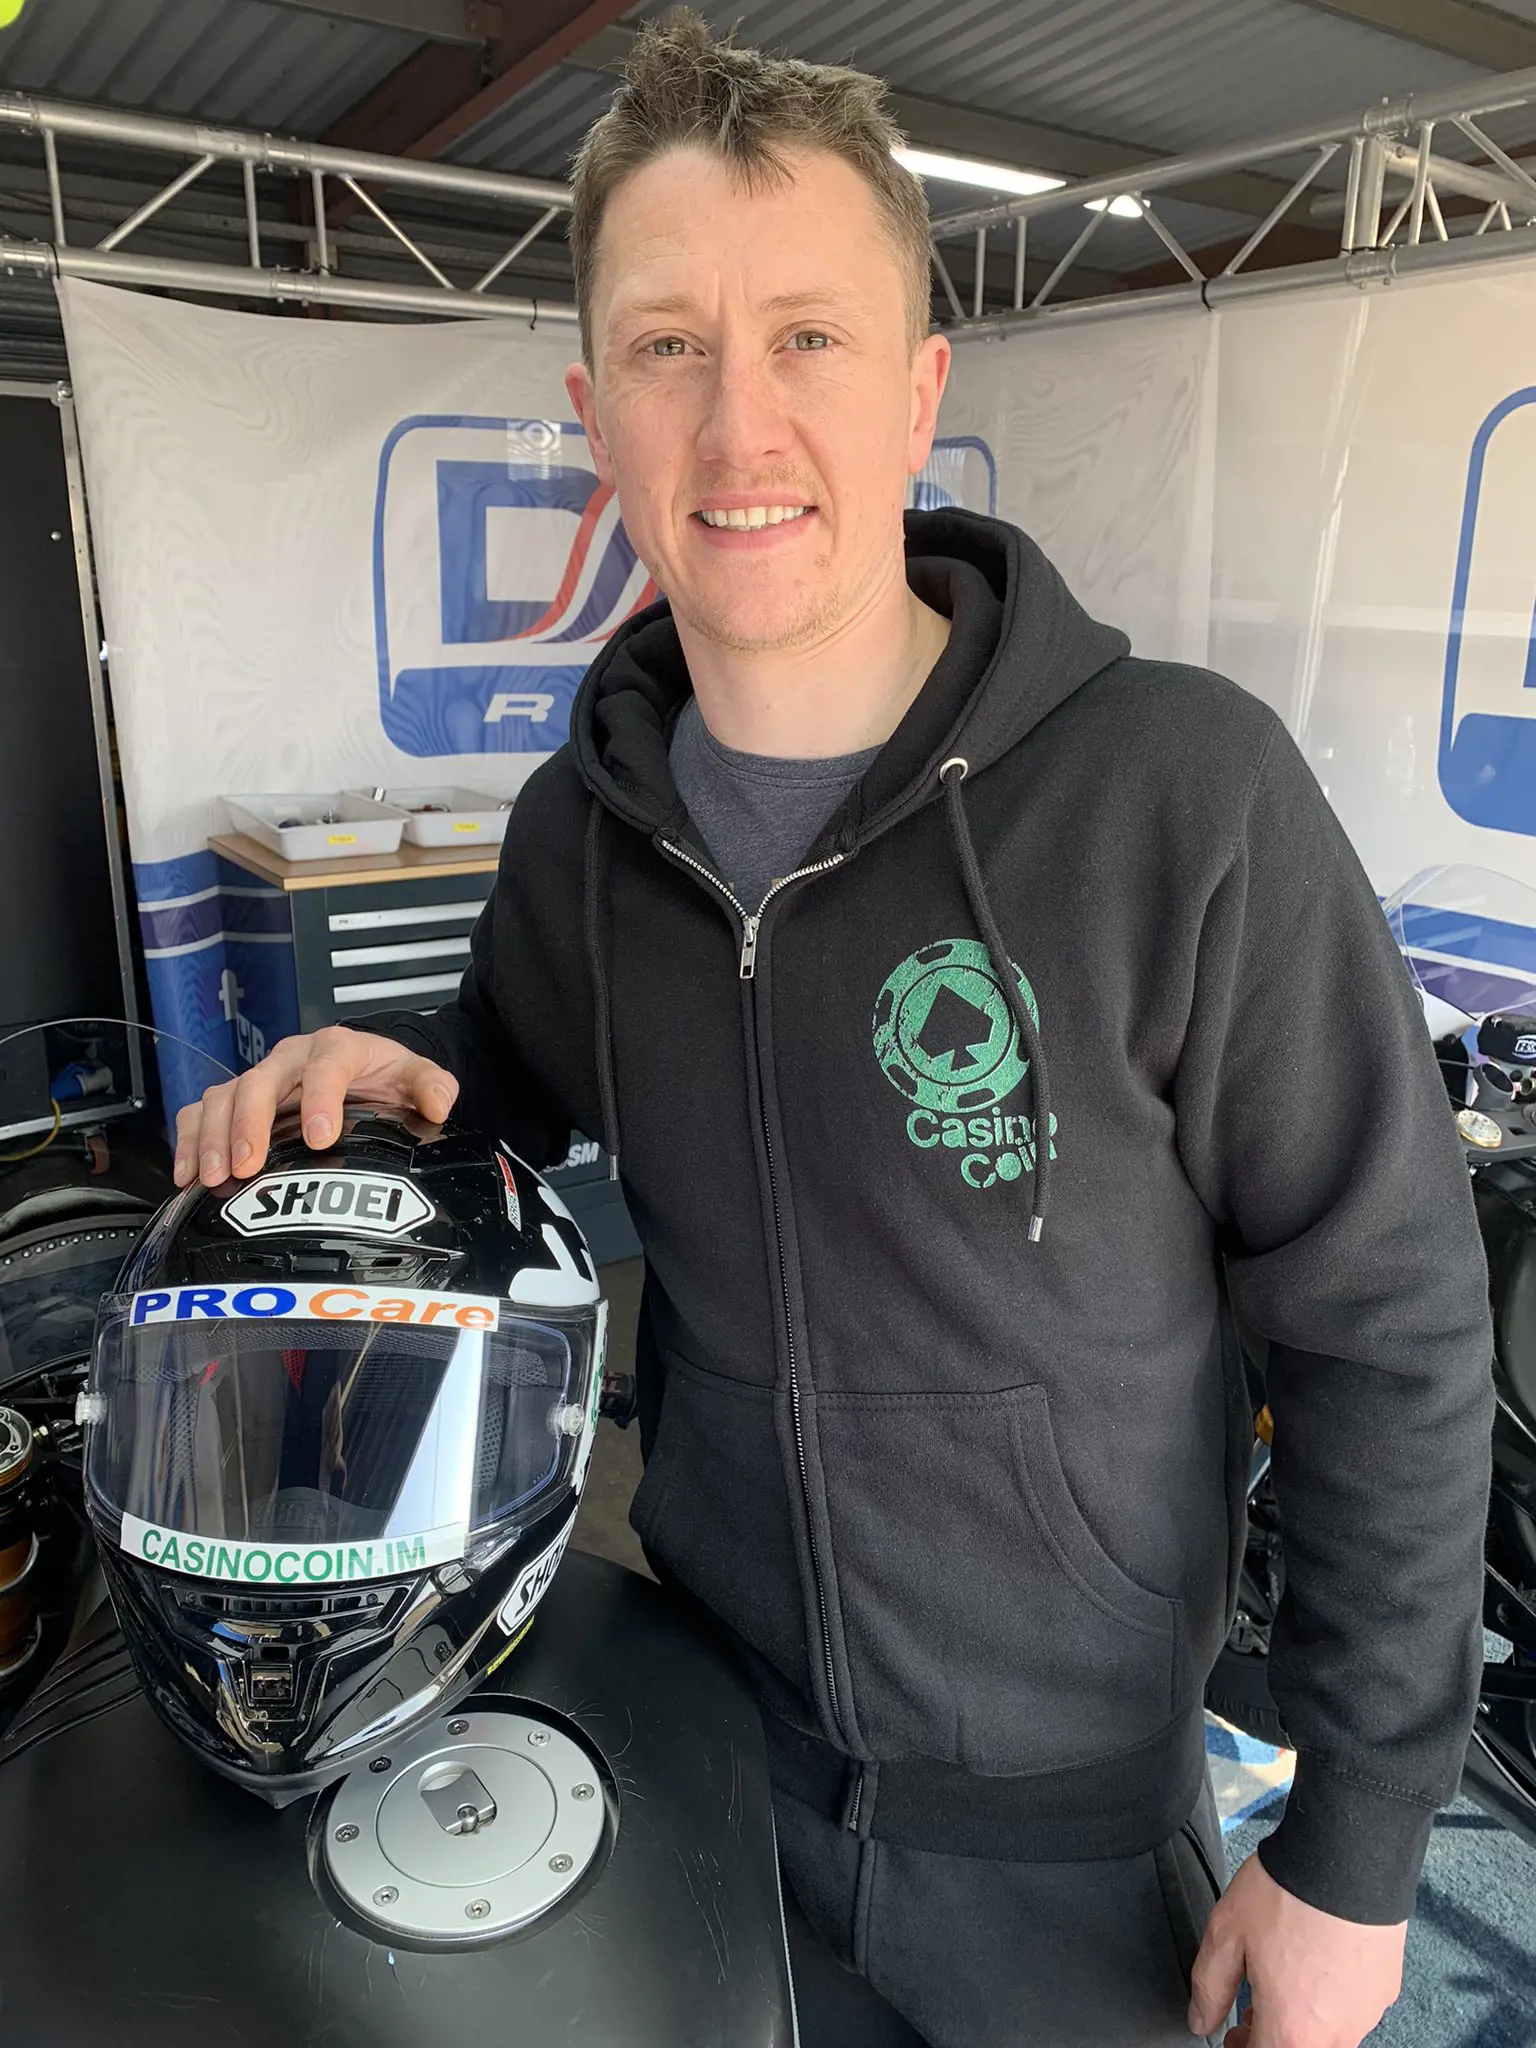 Dean Harrison excited for his first race of 2022 in March